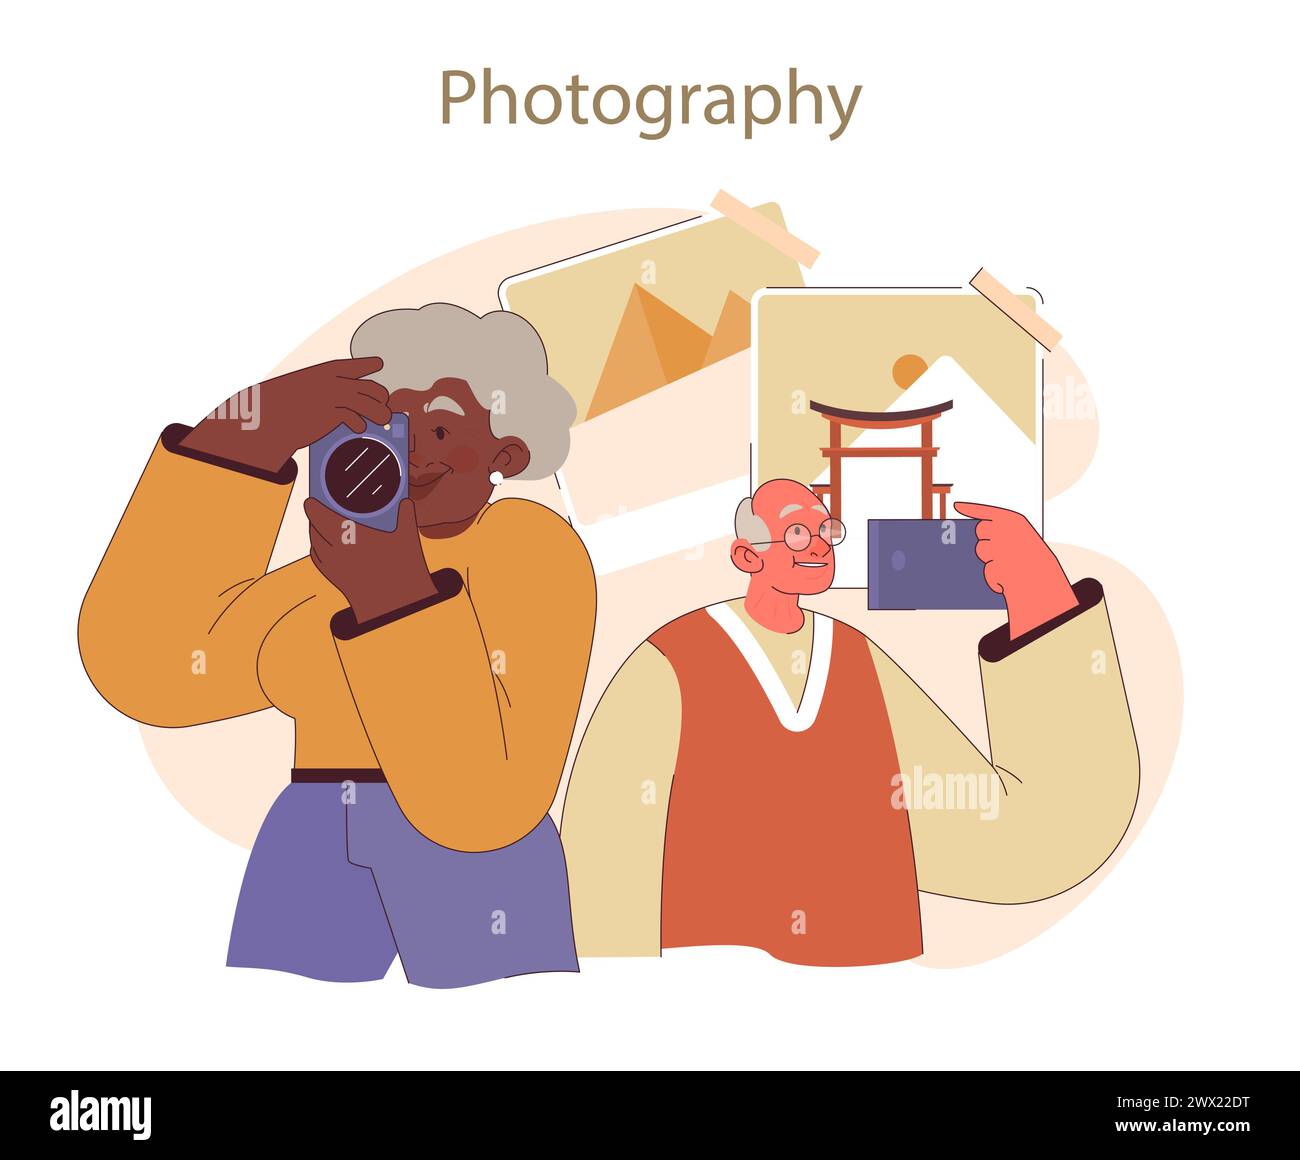 Retirees' Activities concept. Senior woman capturing the world through her lens, with a partner sharing in the creative pursuit of photography. Stock Vector